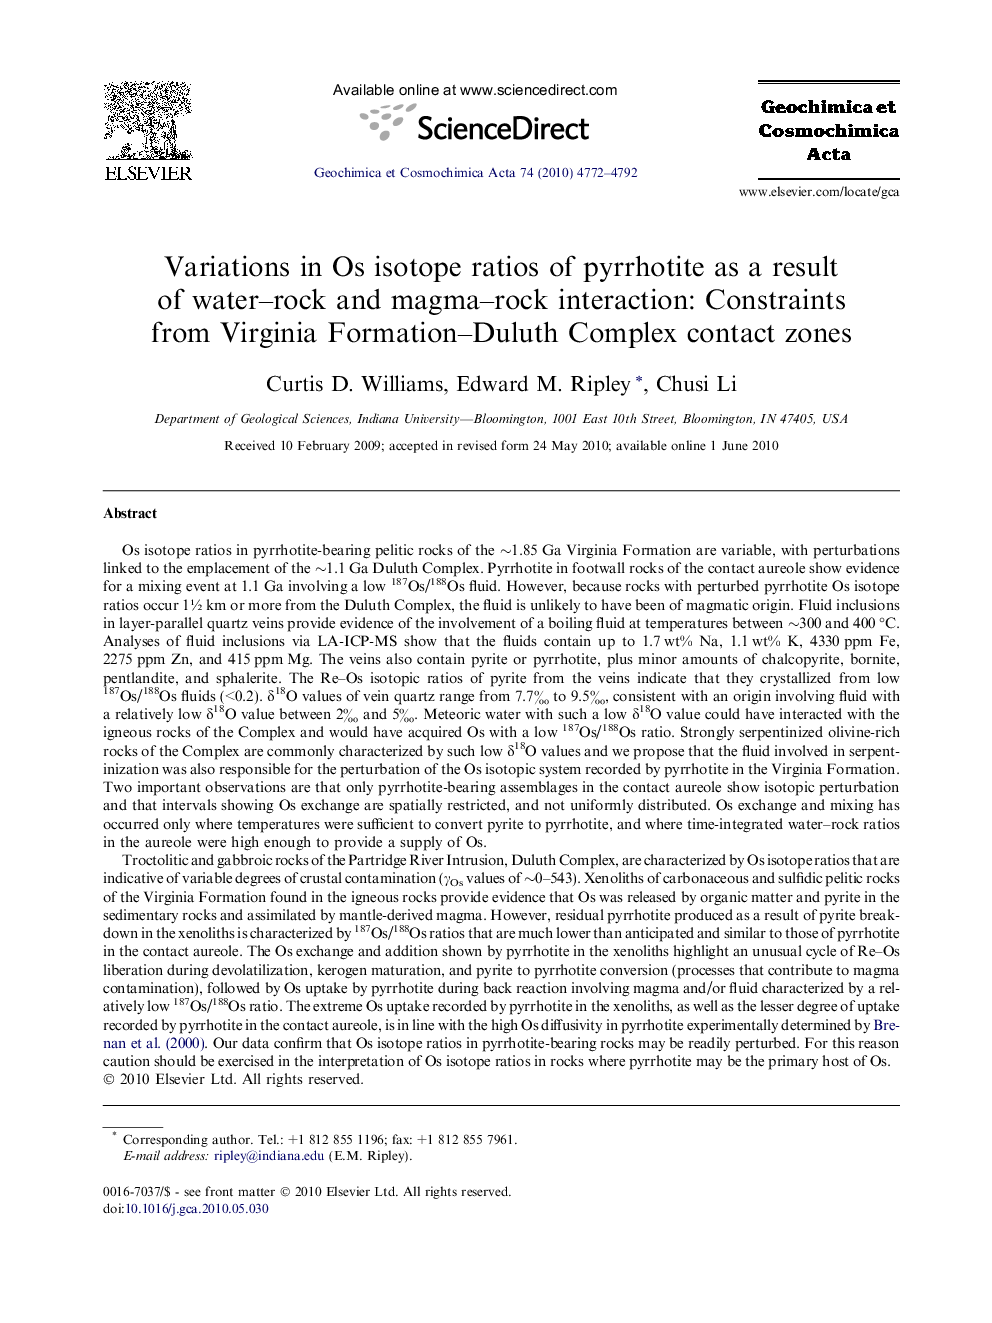 Variations in Os isotope ratios of pyrrhotite as a result of water–rock and magma–rock interaction: Constraints from Virginia Formation–Duluth Complex contact zones